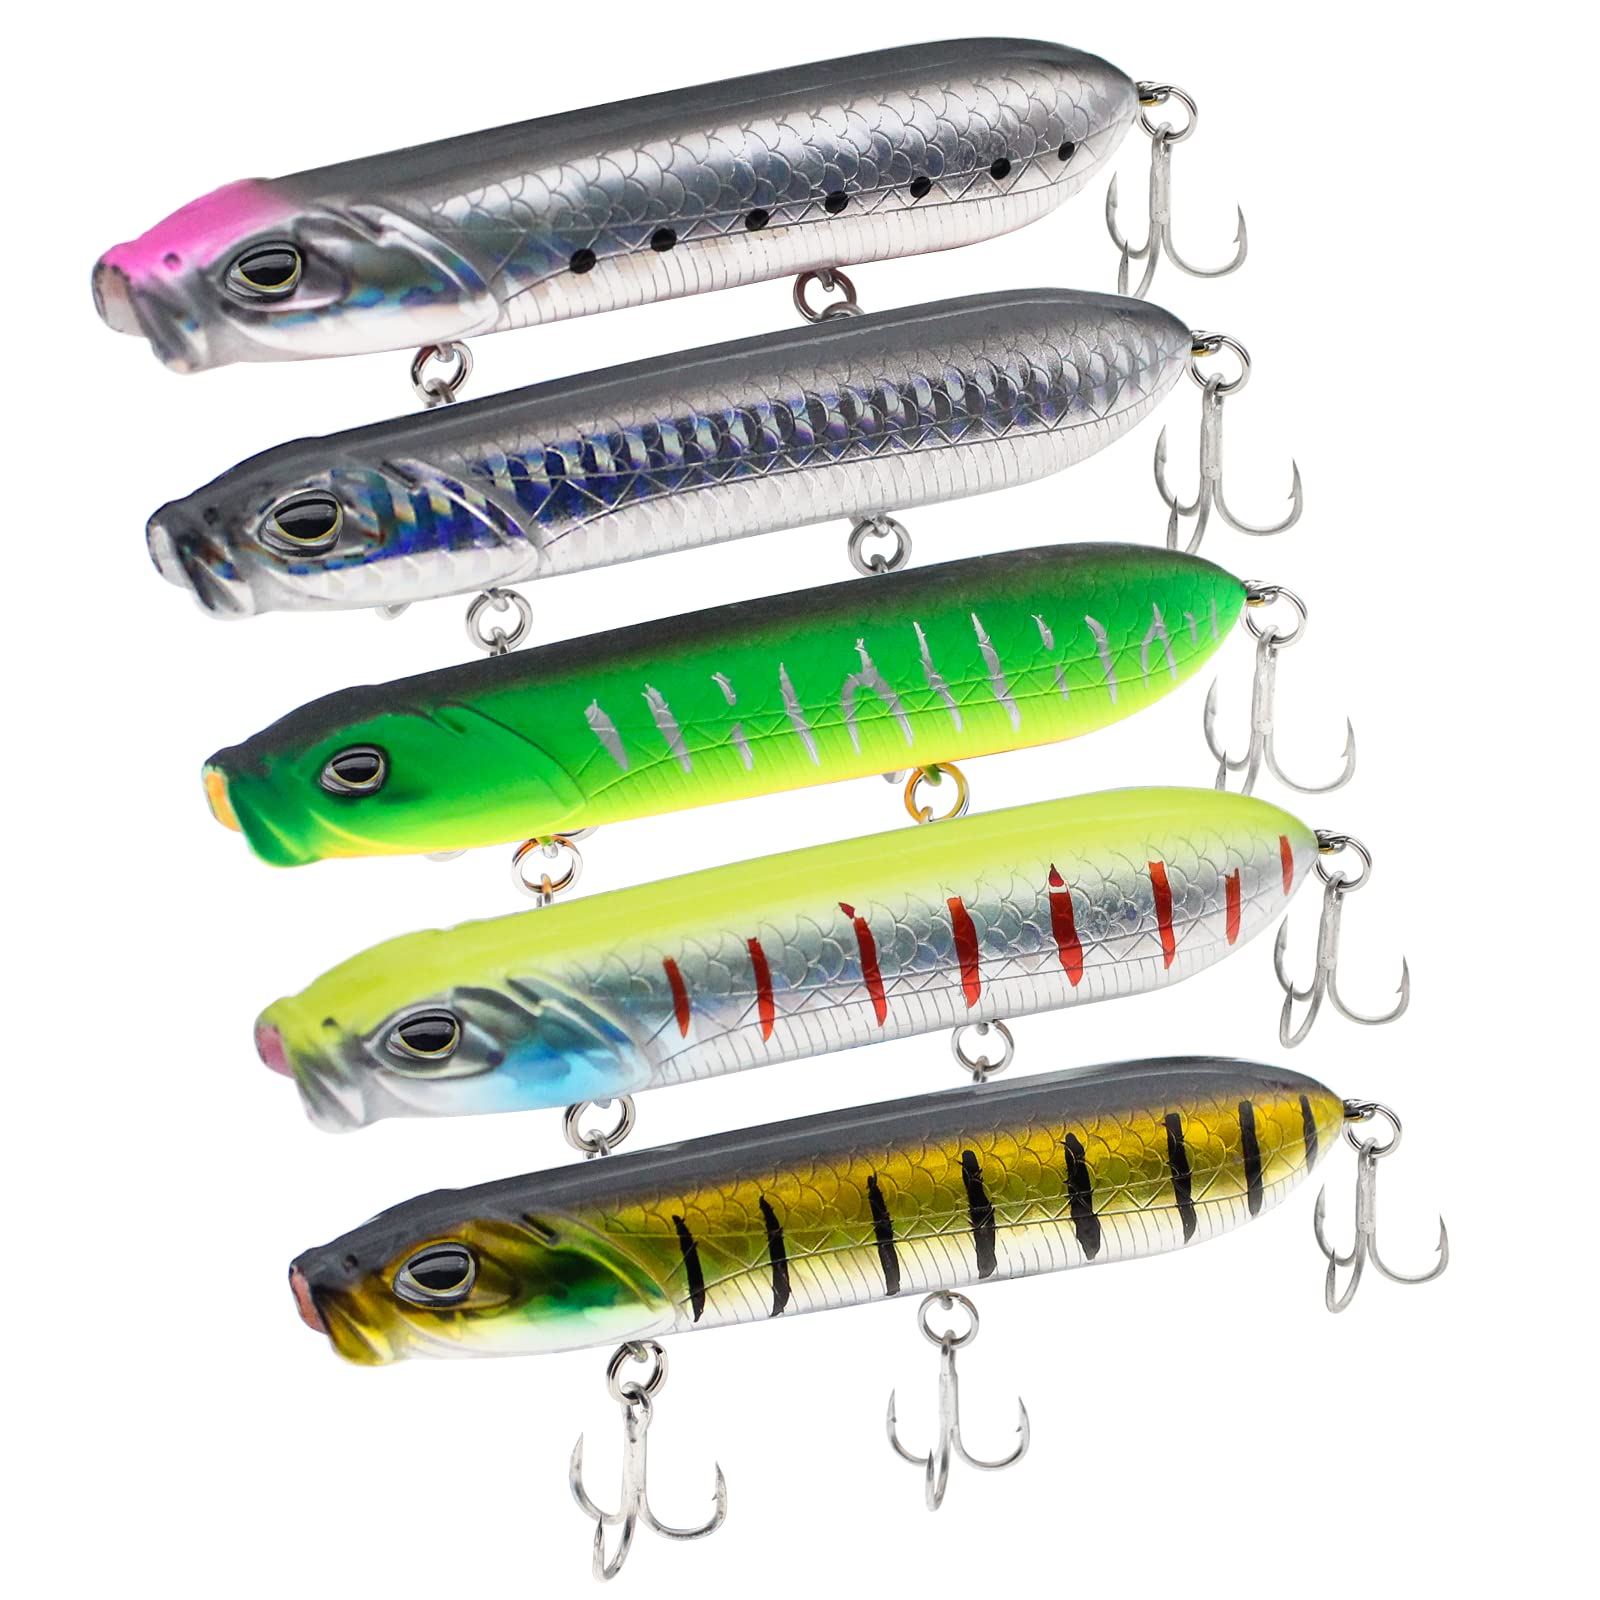 AGOOL Trout Fishing Lures Kit Spinner Bait Spoon Lure for Crappie Perch Rooster Tail Lure Minnow Swimbait Crankbaits Popper Small Plastic Variety Lure